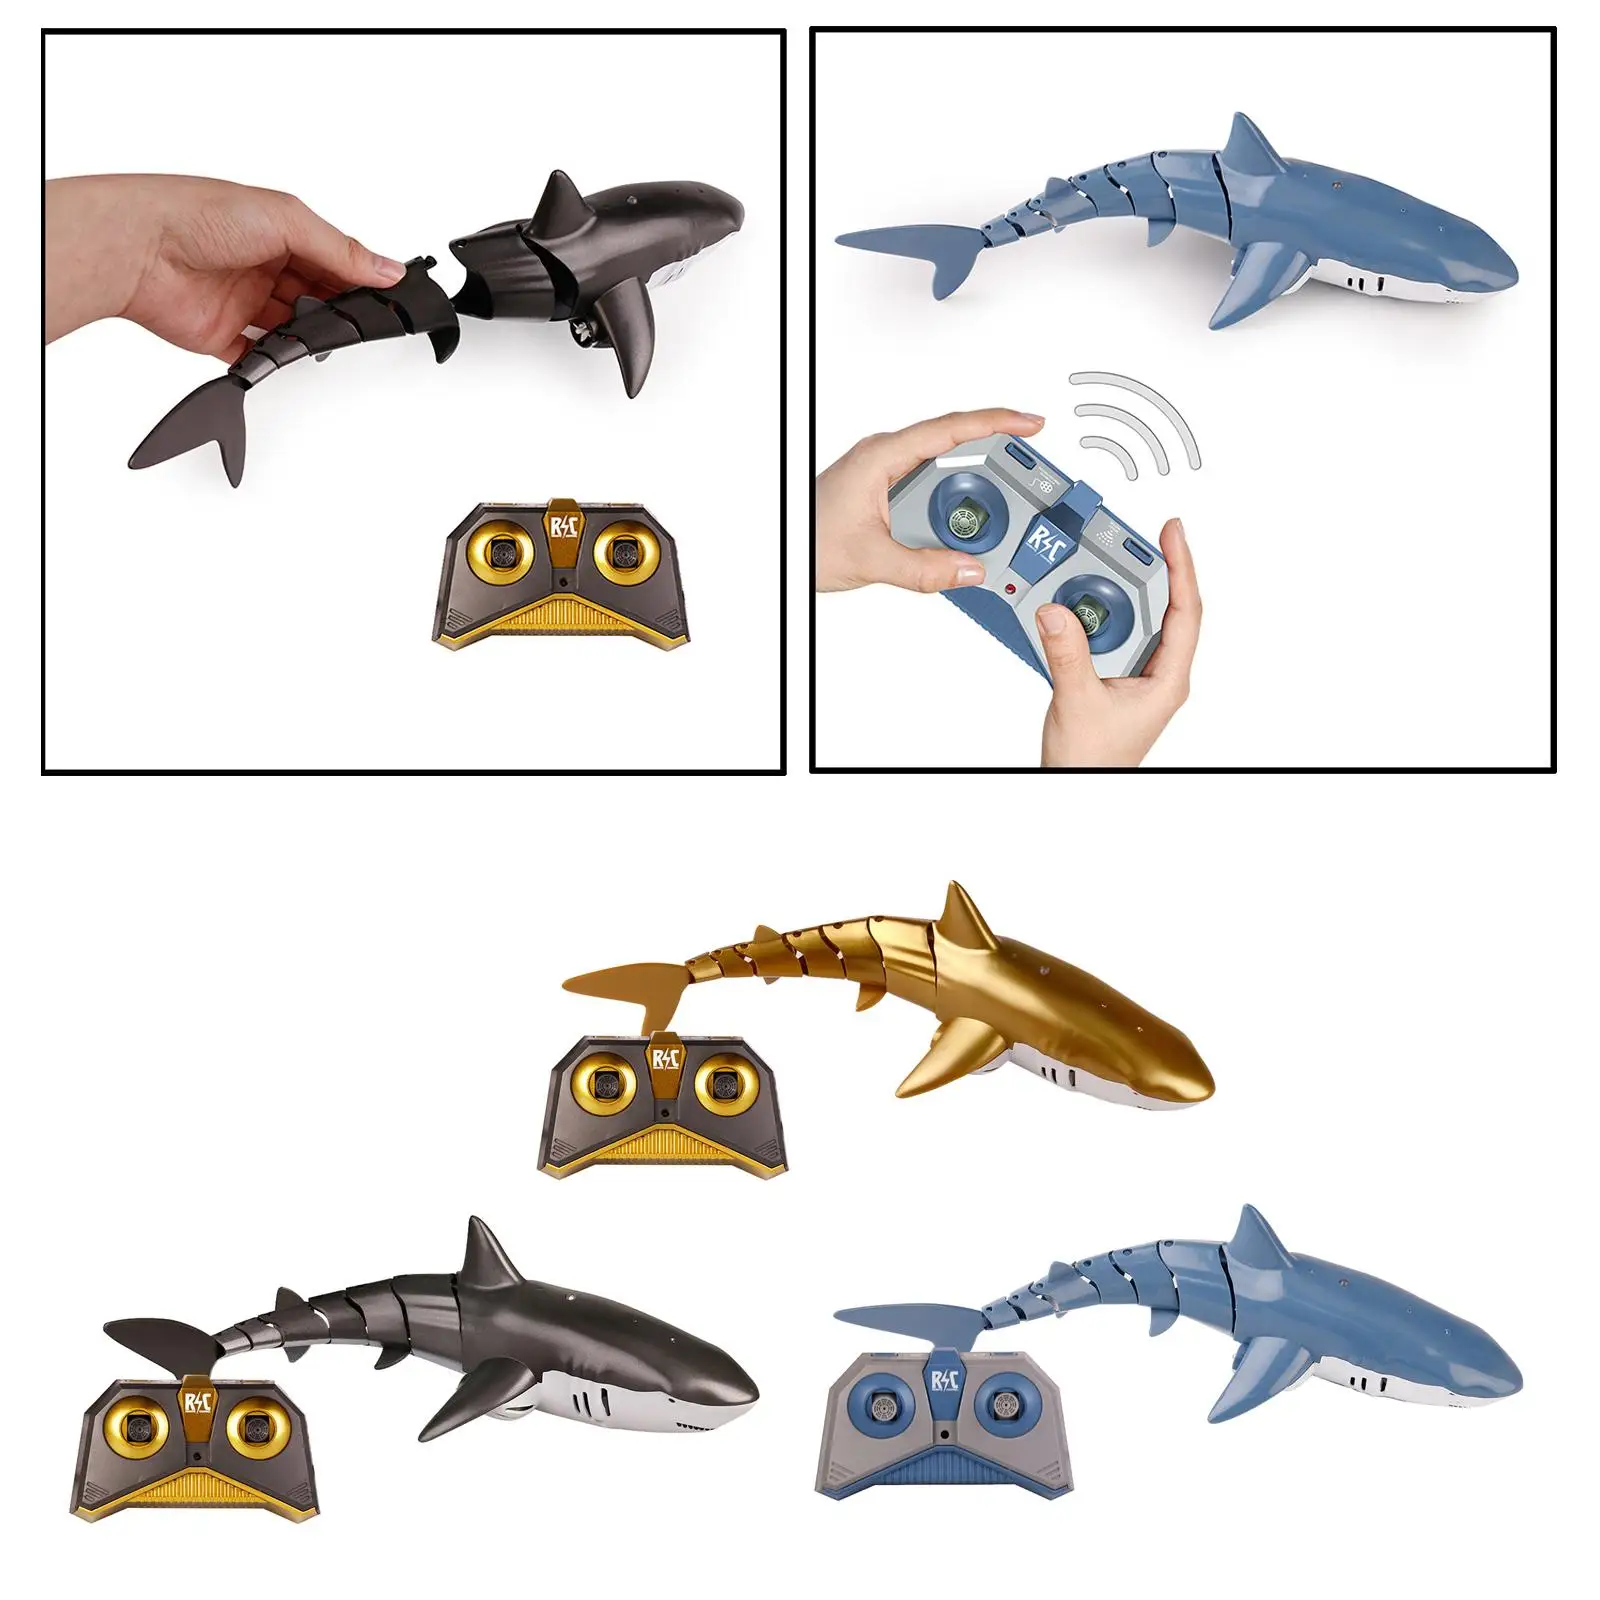 Waterproof Remote Control Mini Shark Electric Toy RC Boat Swinging Shark Toy